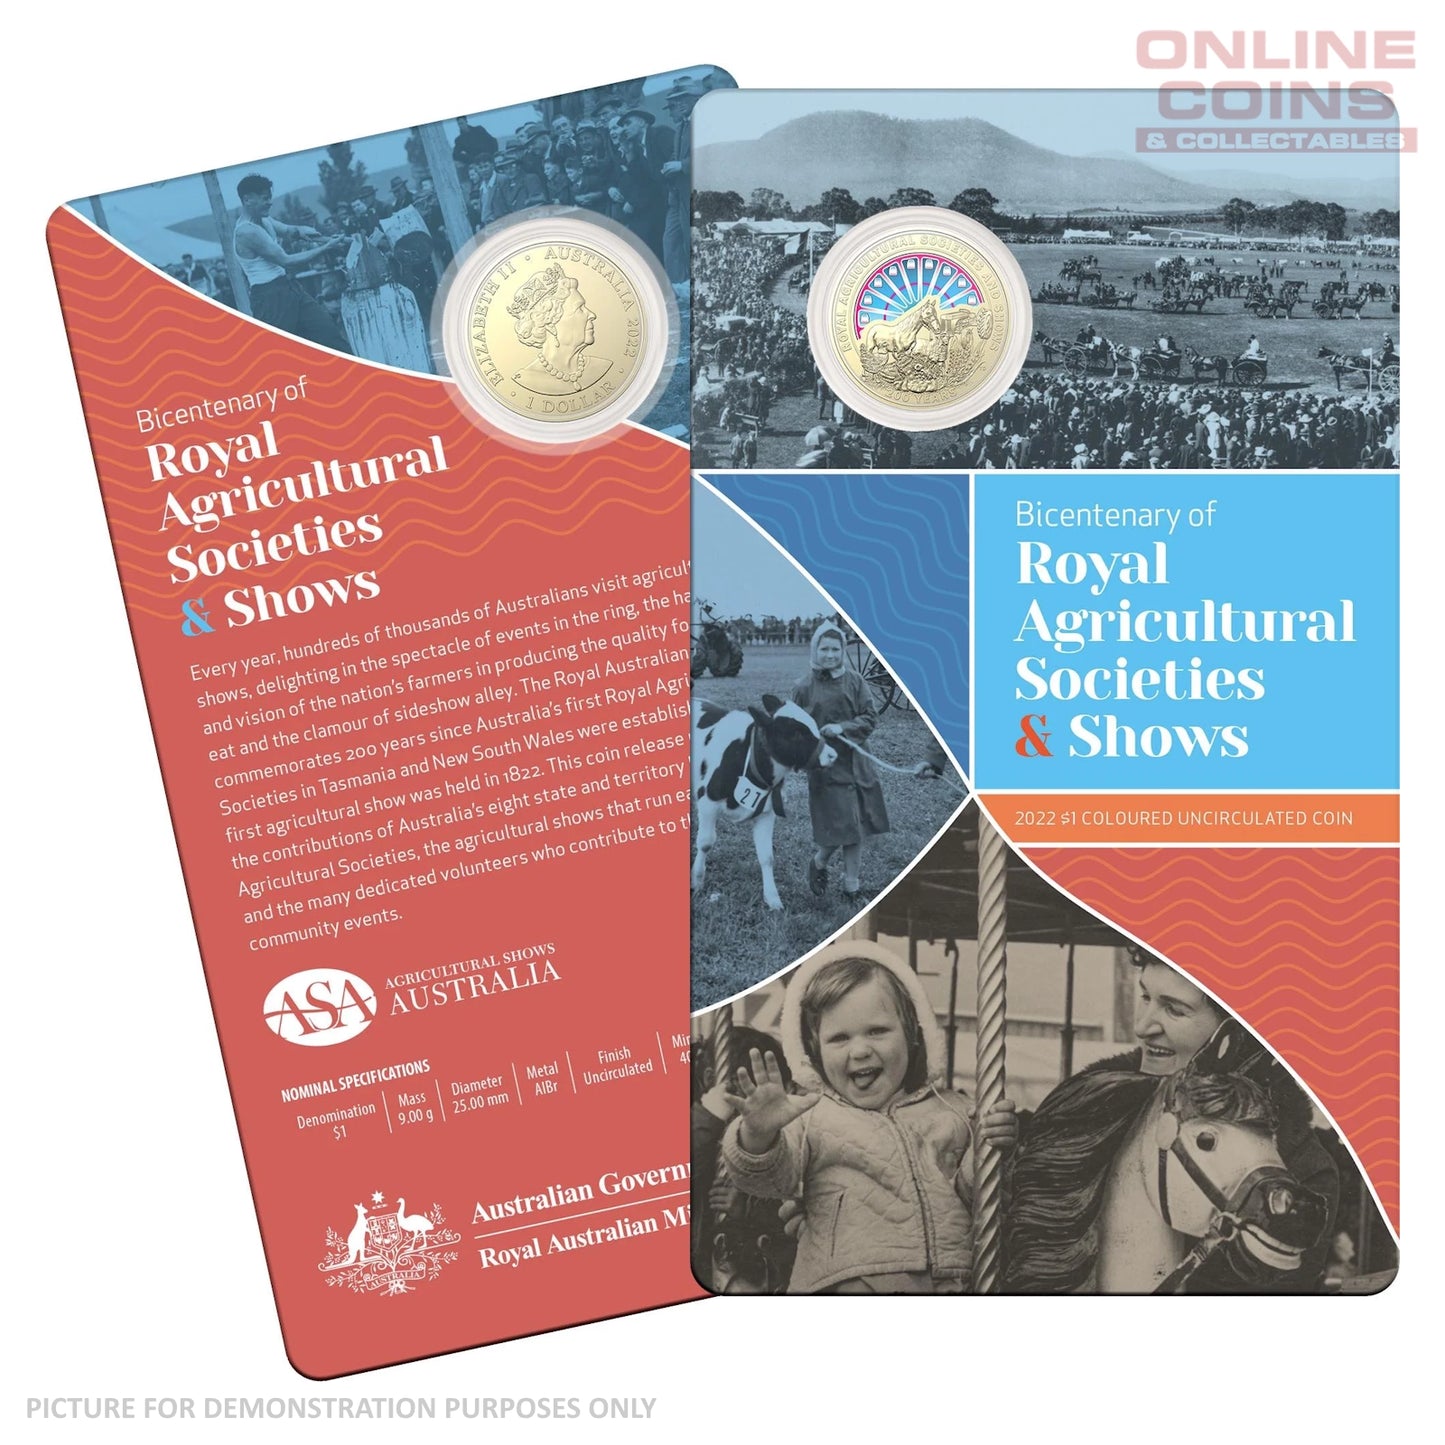 2022 RAM $1 Coloured Uncirculated Carded Coin - Bicentenary of Royal Agricultural Society